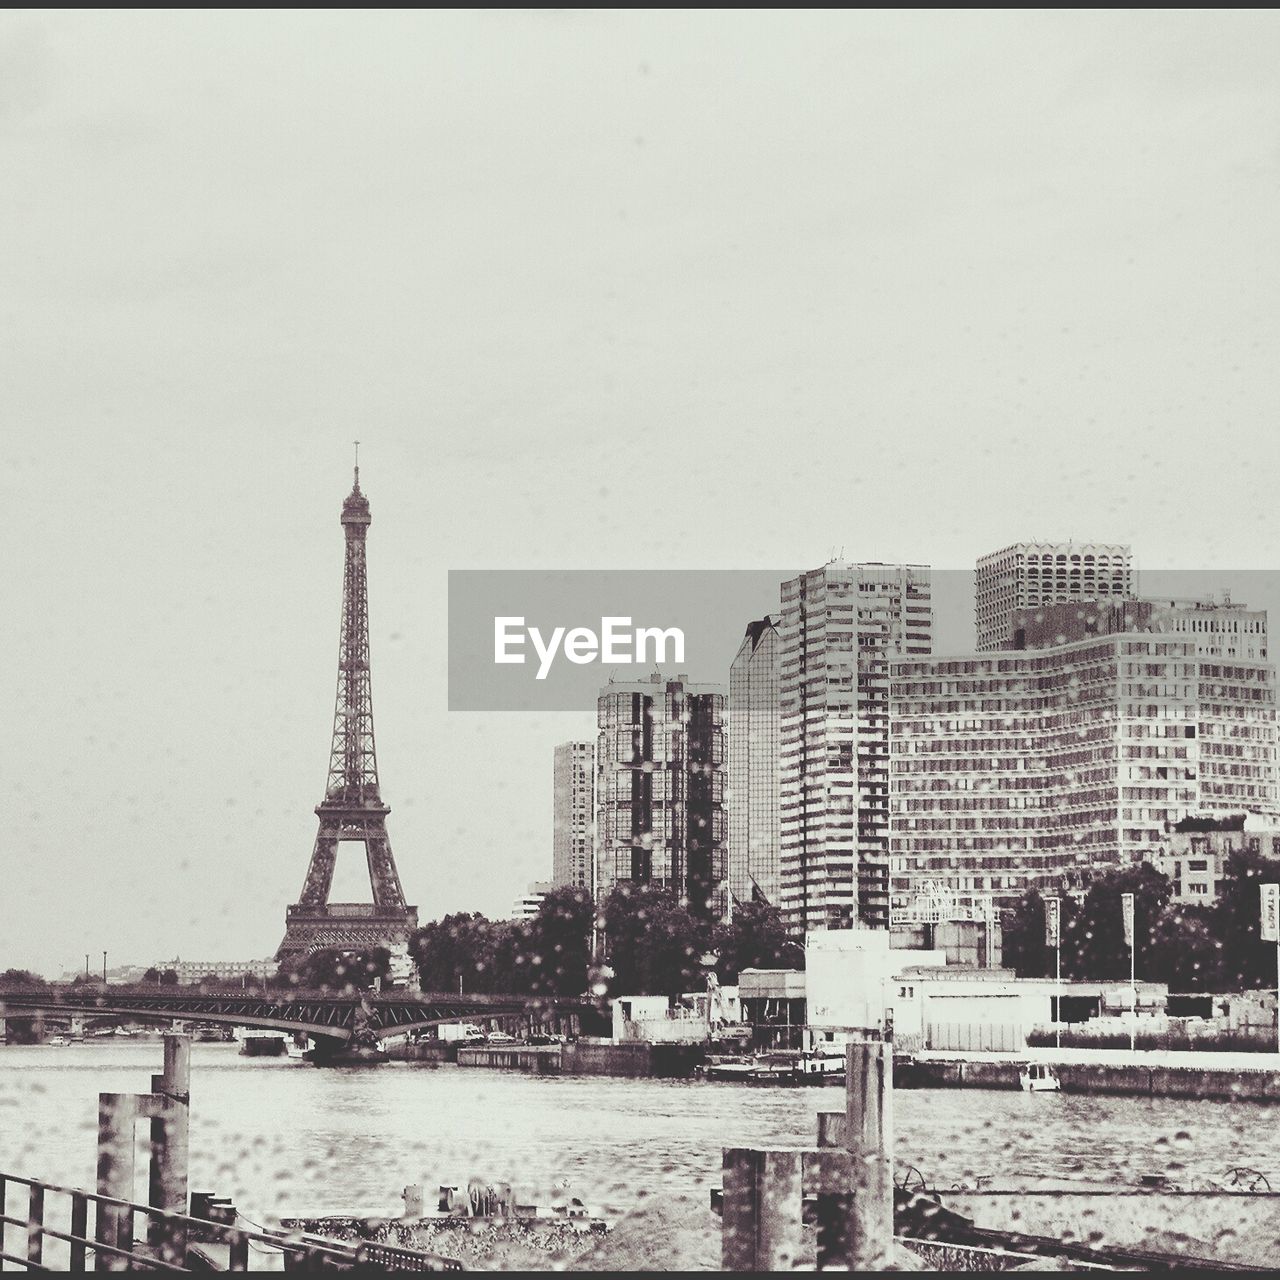 VIEW OF CITYSCAPE WITH EIFFEL TOWER IN BACKGROUND